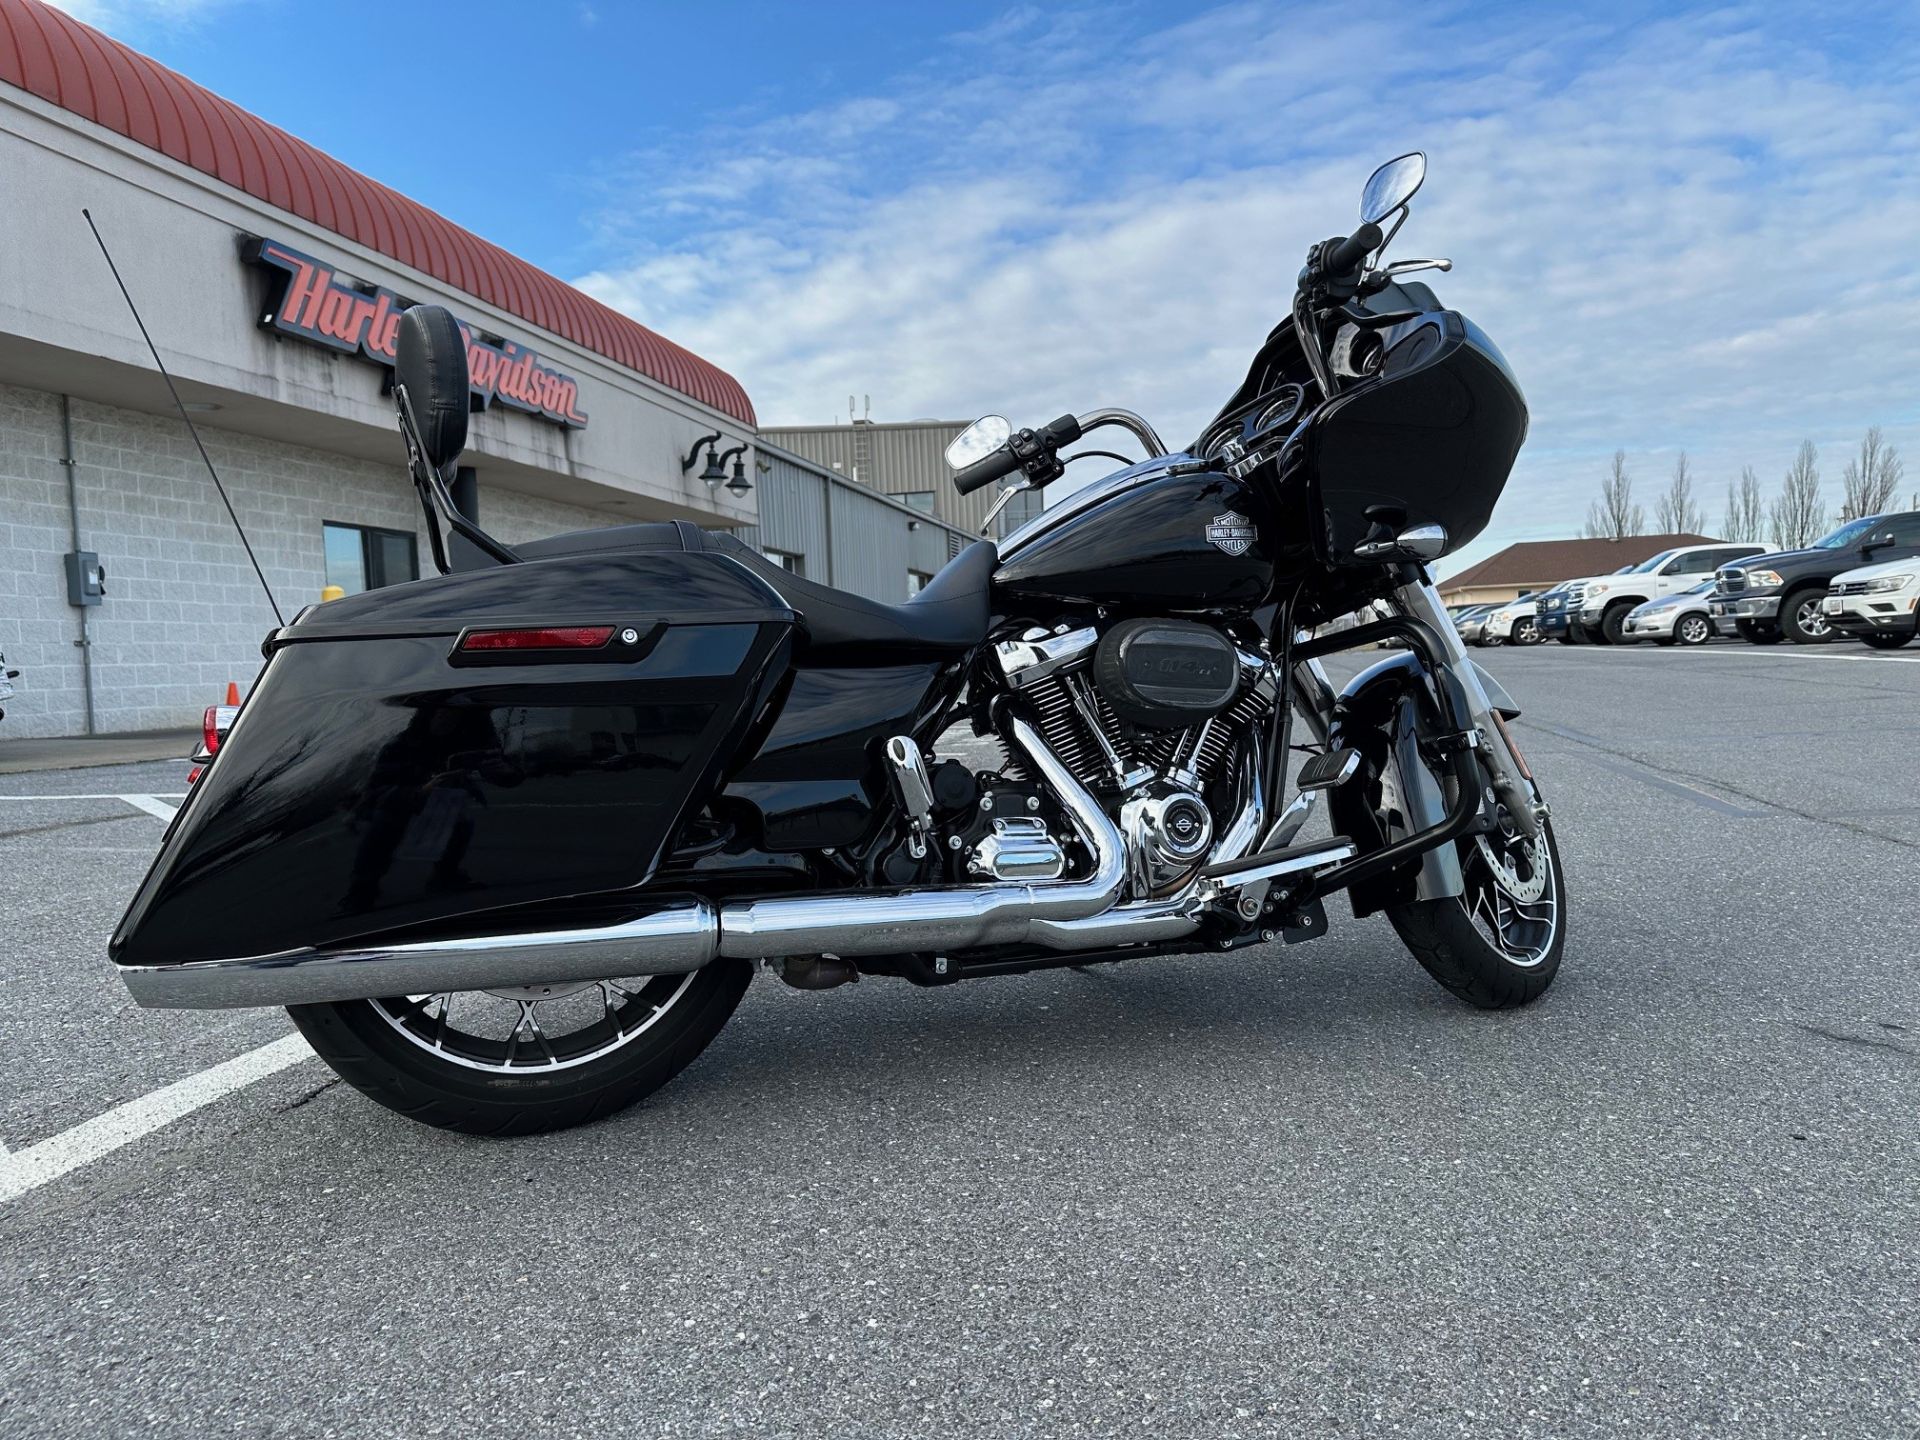 2022 Harley-Davidson Road Glide® Special in Frederick, Maryland - Photo 1